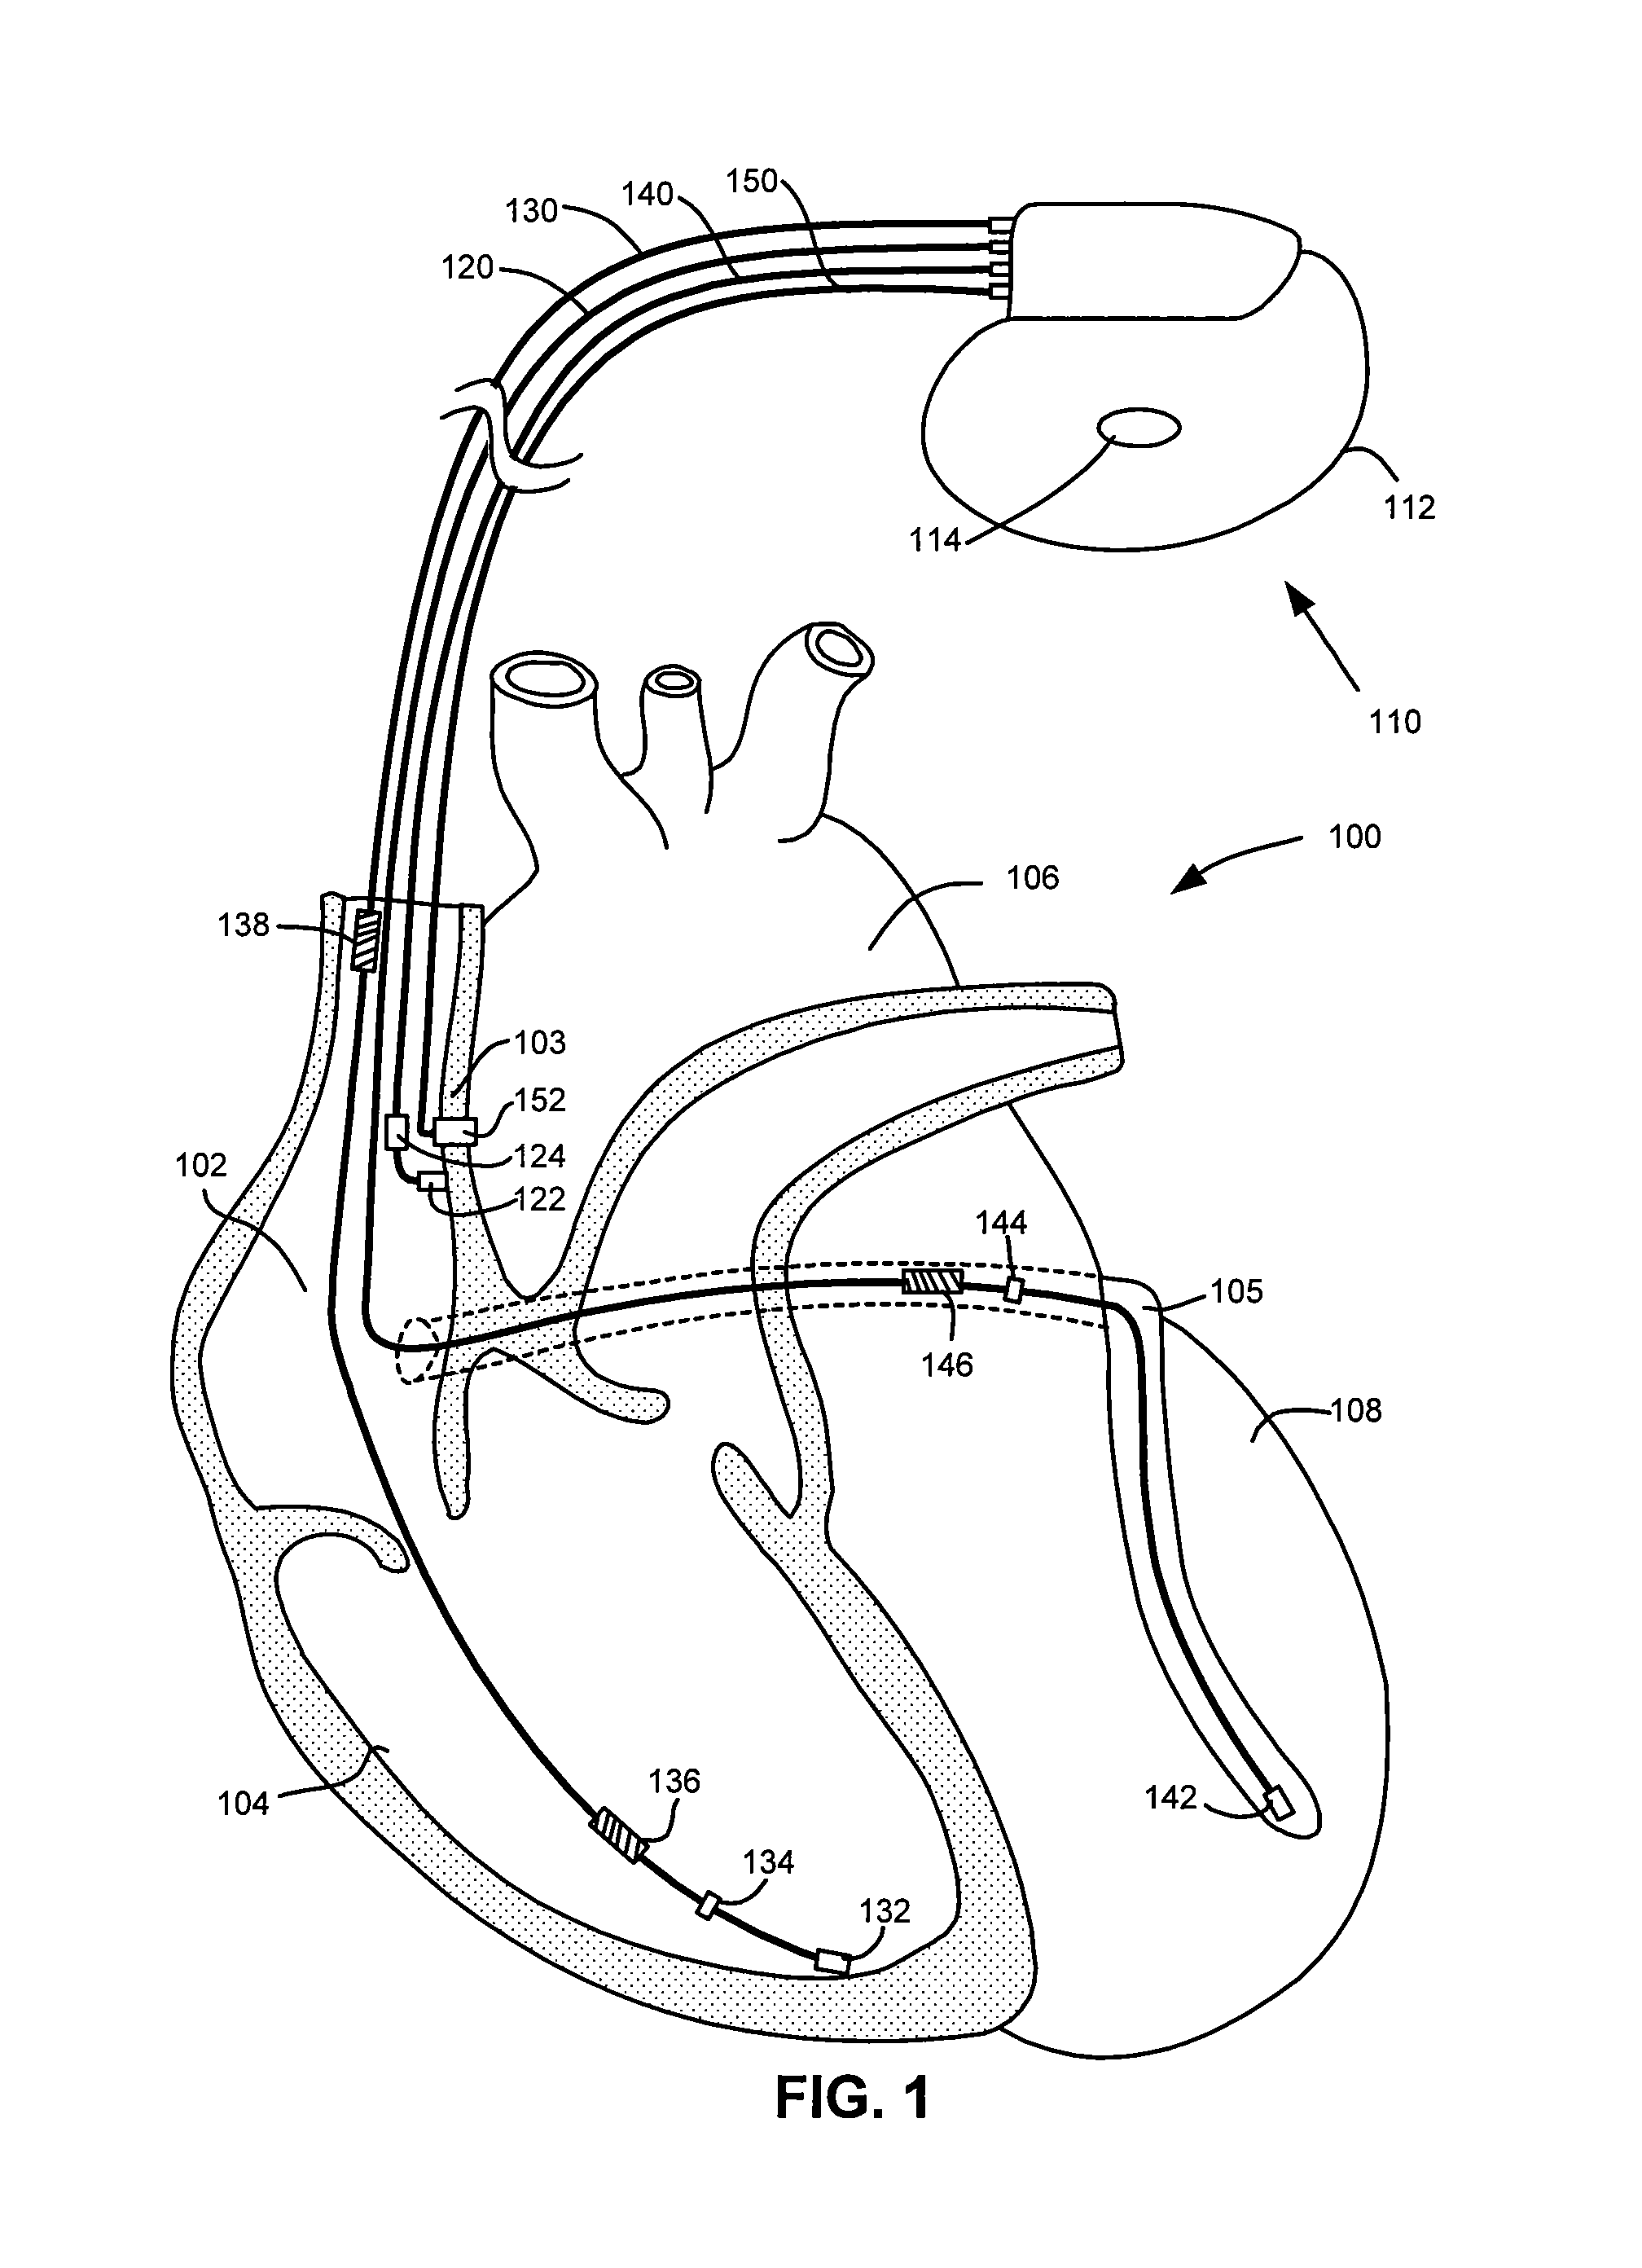 Implantable cardiac device and method for monitoring blood-glucose concentration